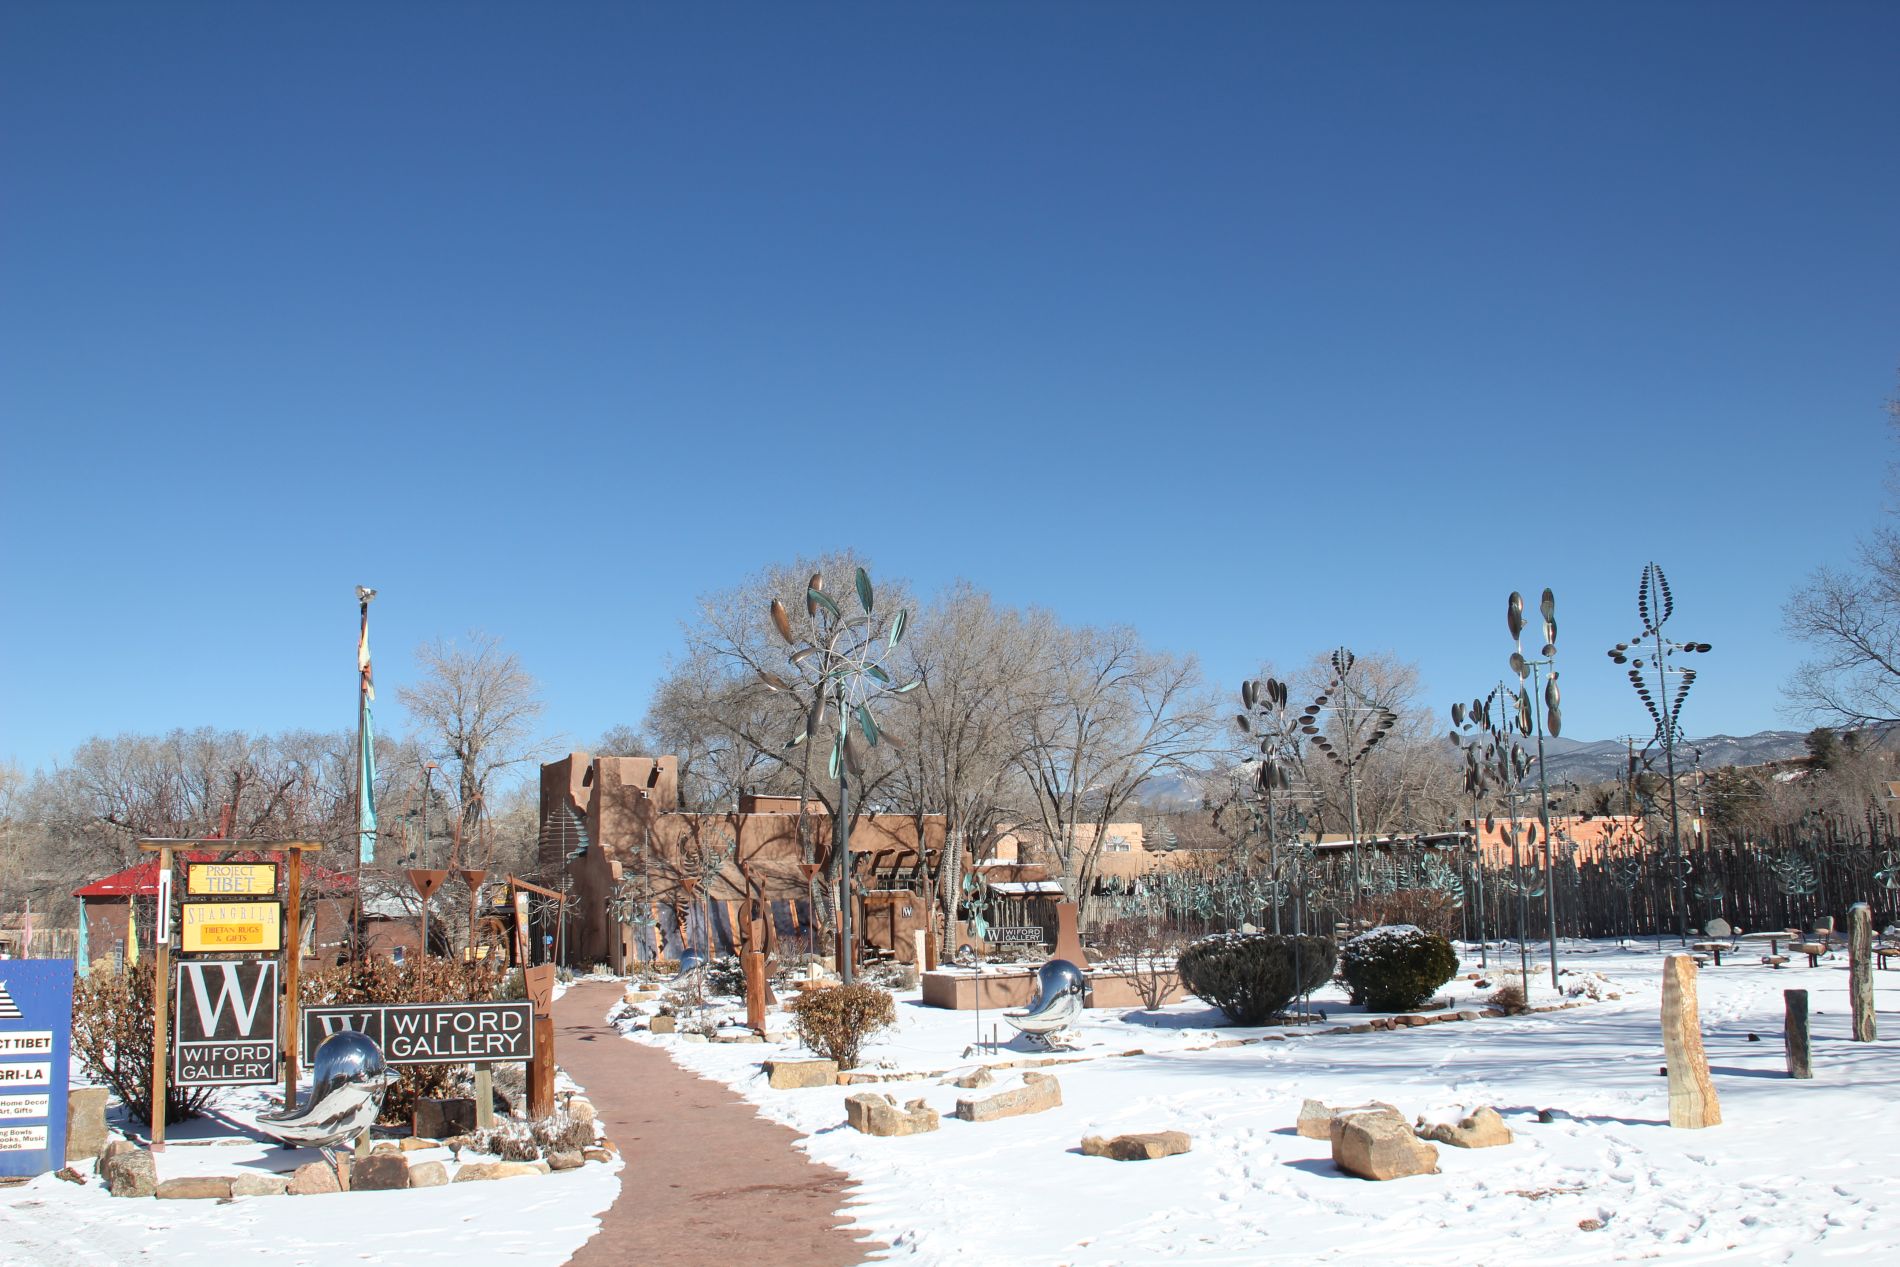 Wiford Gallery on Canyon Road in Santa Fe, New Mexico